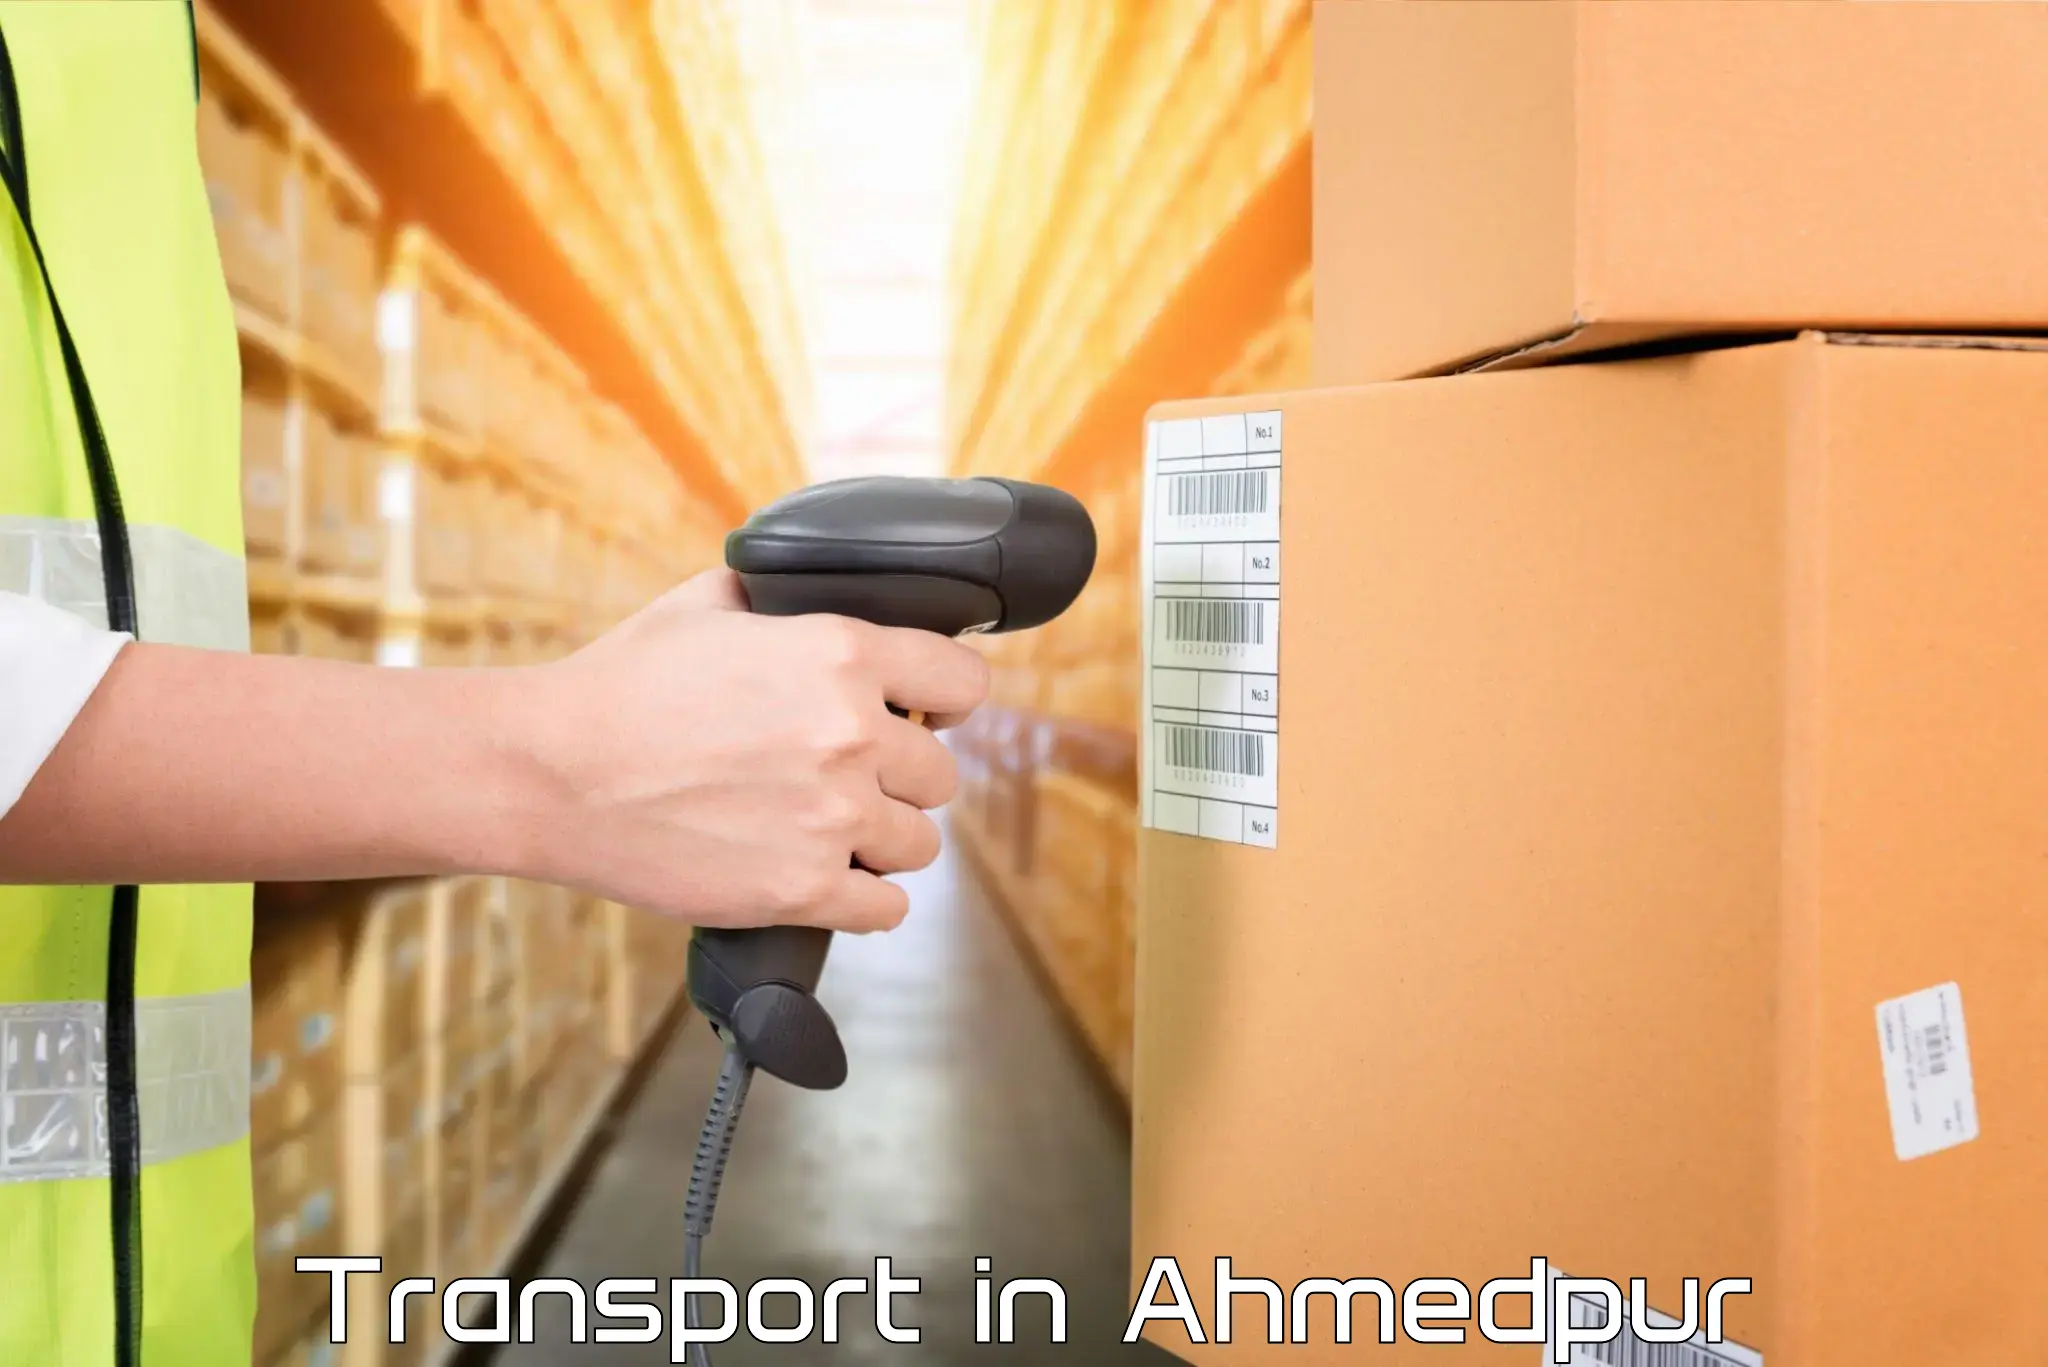 Vehicle transport services in Ahmedpur